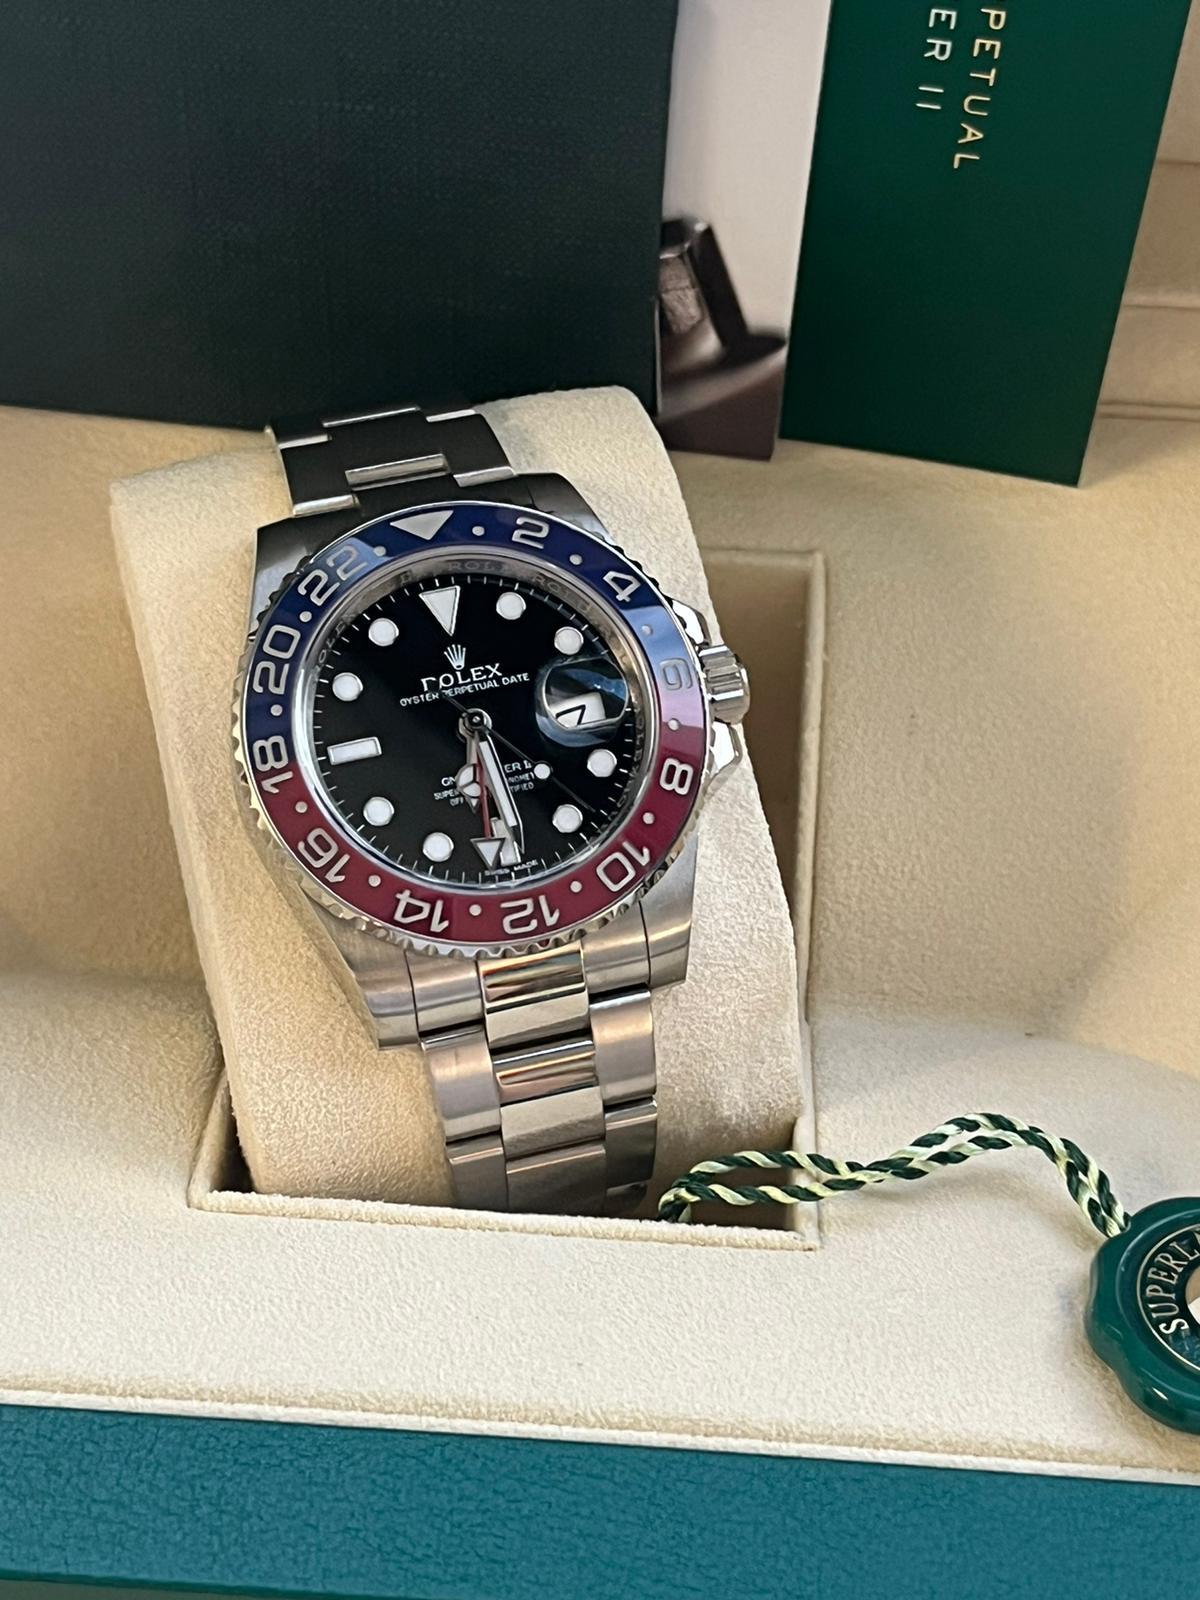 Rolex GMT Master II White Gold Pepsi Bezel Mens Watch 116719. This timepiece is powered by the self-winding 3285 calibers with a 70-hour power reserve, Chronometer with an 18K white gold case 40 mm in diameter. Rolex logo on a crown. 18K white gold